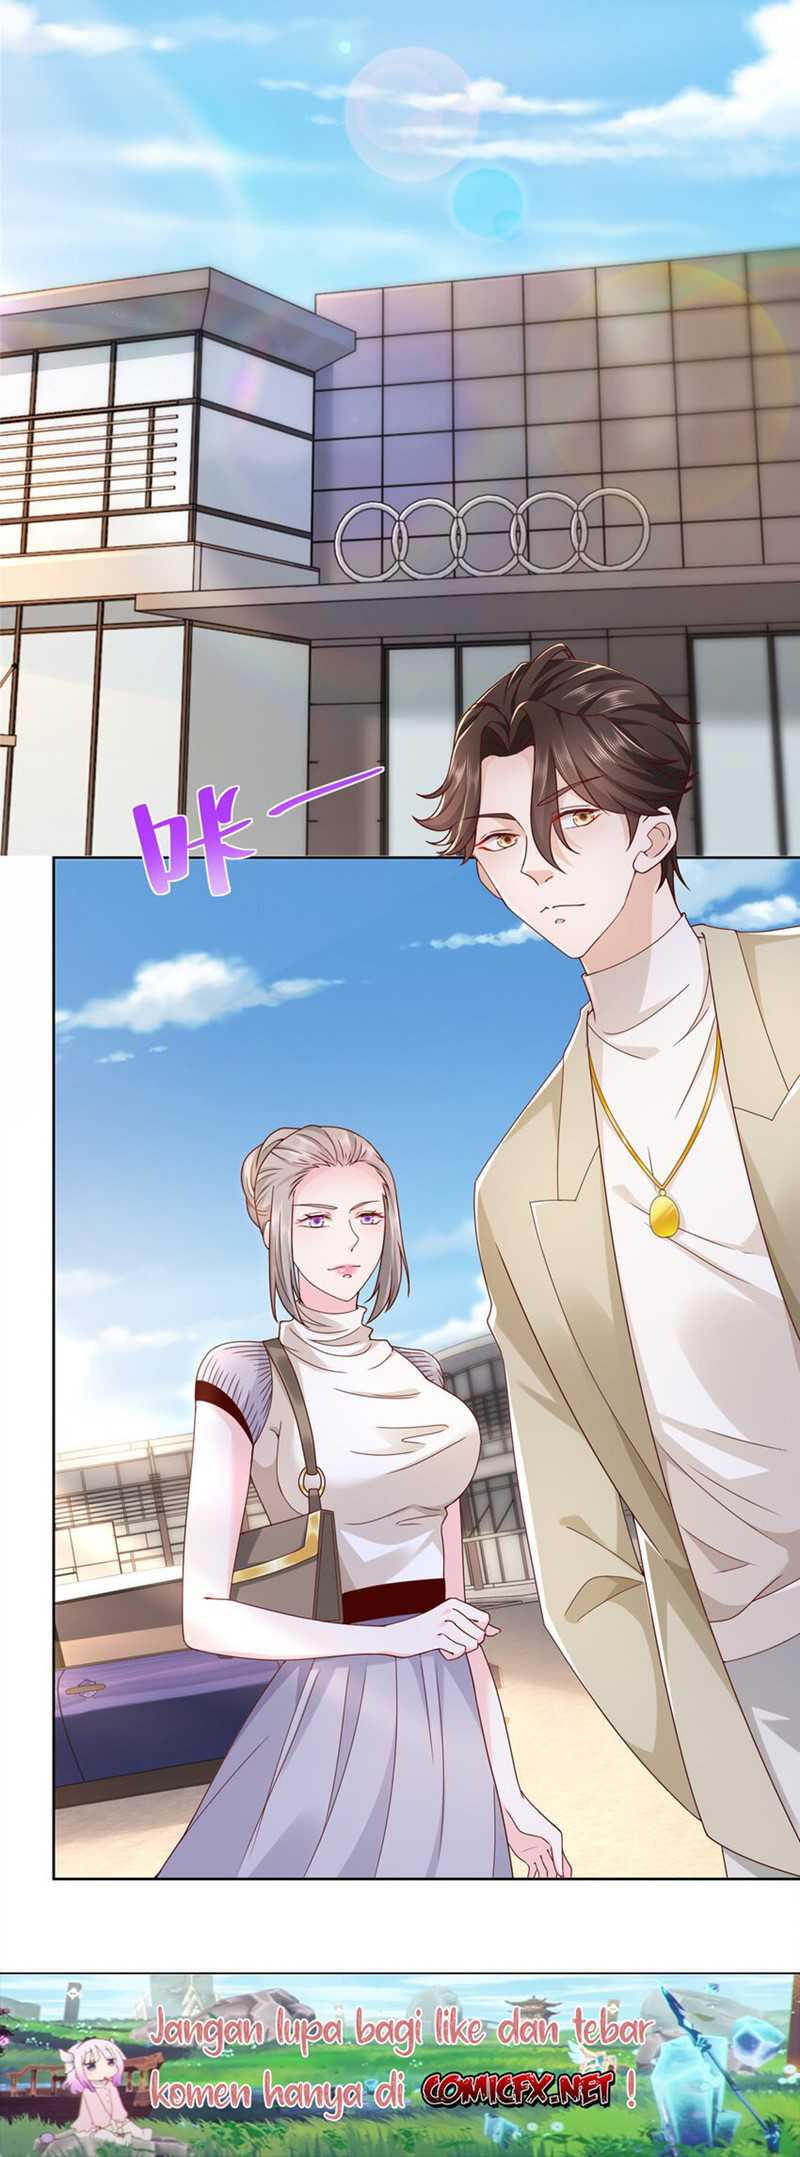 I Randomly Have A New Career Every Week Chapter 58